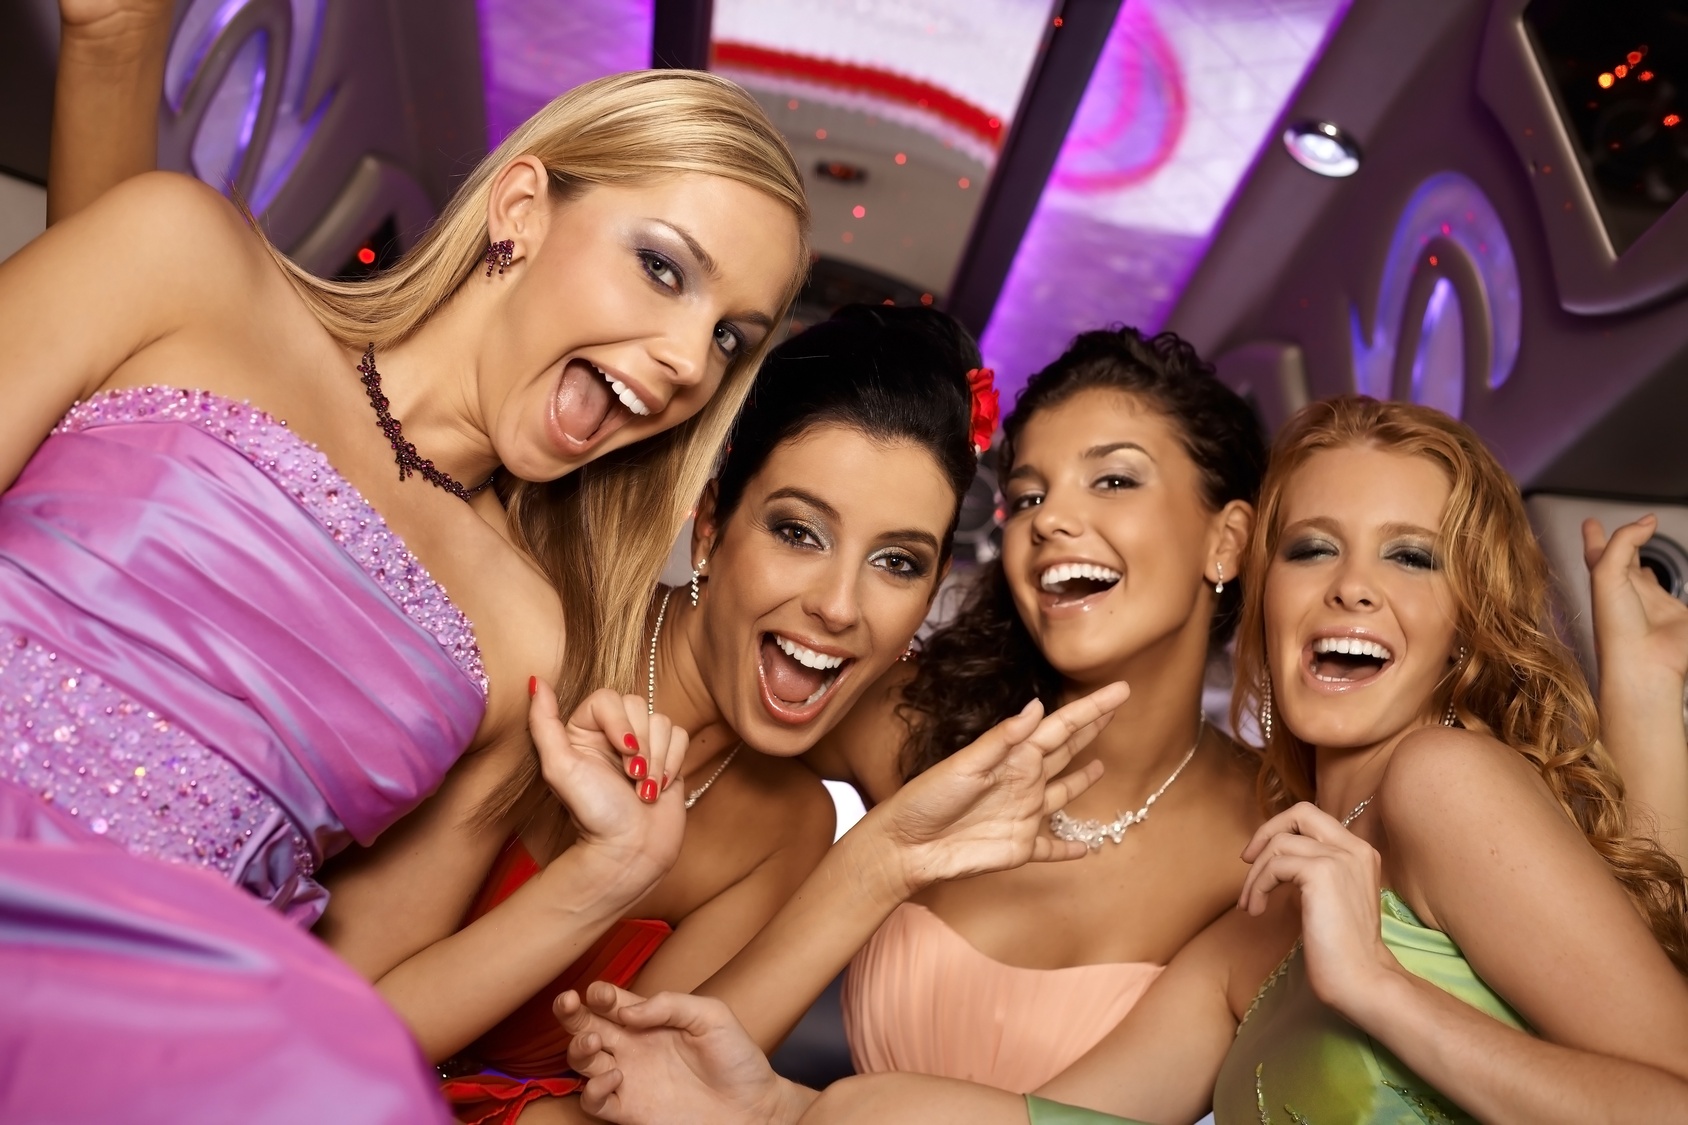 Limo Service for Bachelor or Bachelorette Parties in NYC.